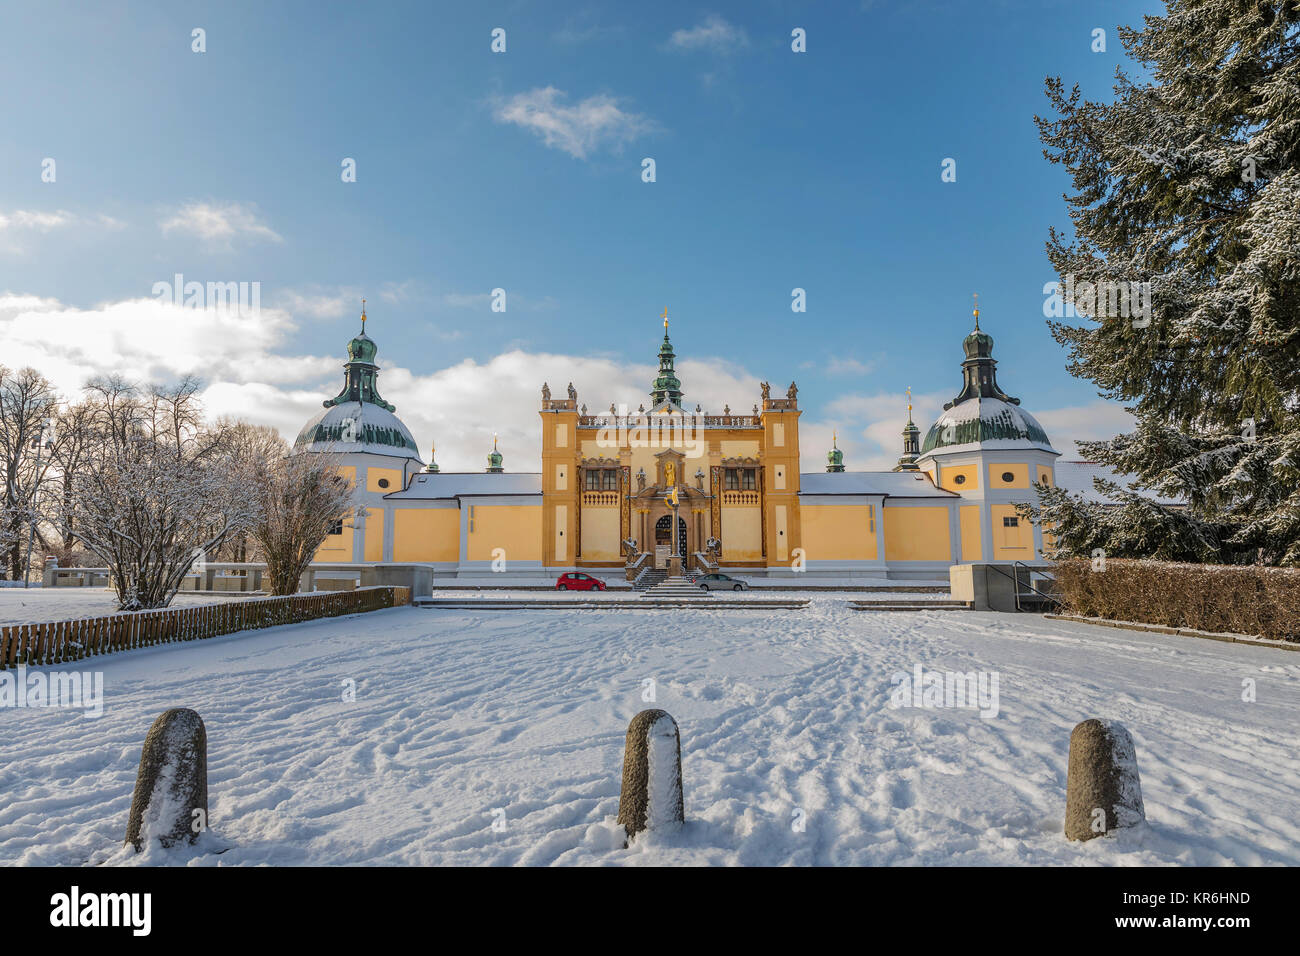 Church of baroque monastery at Svata Hora - The Holy Mountain. Monastery in winter time. Pribram, Czech Republic Stock Photo